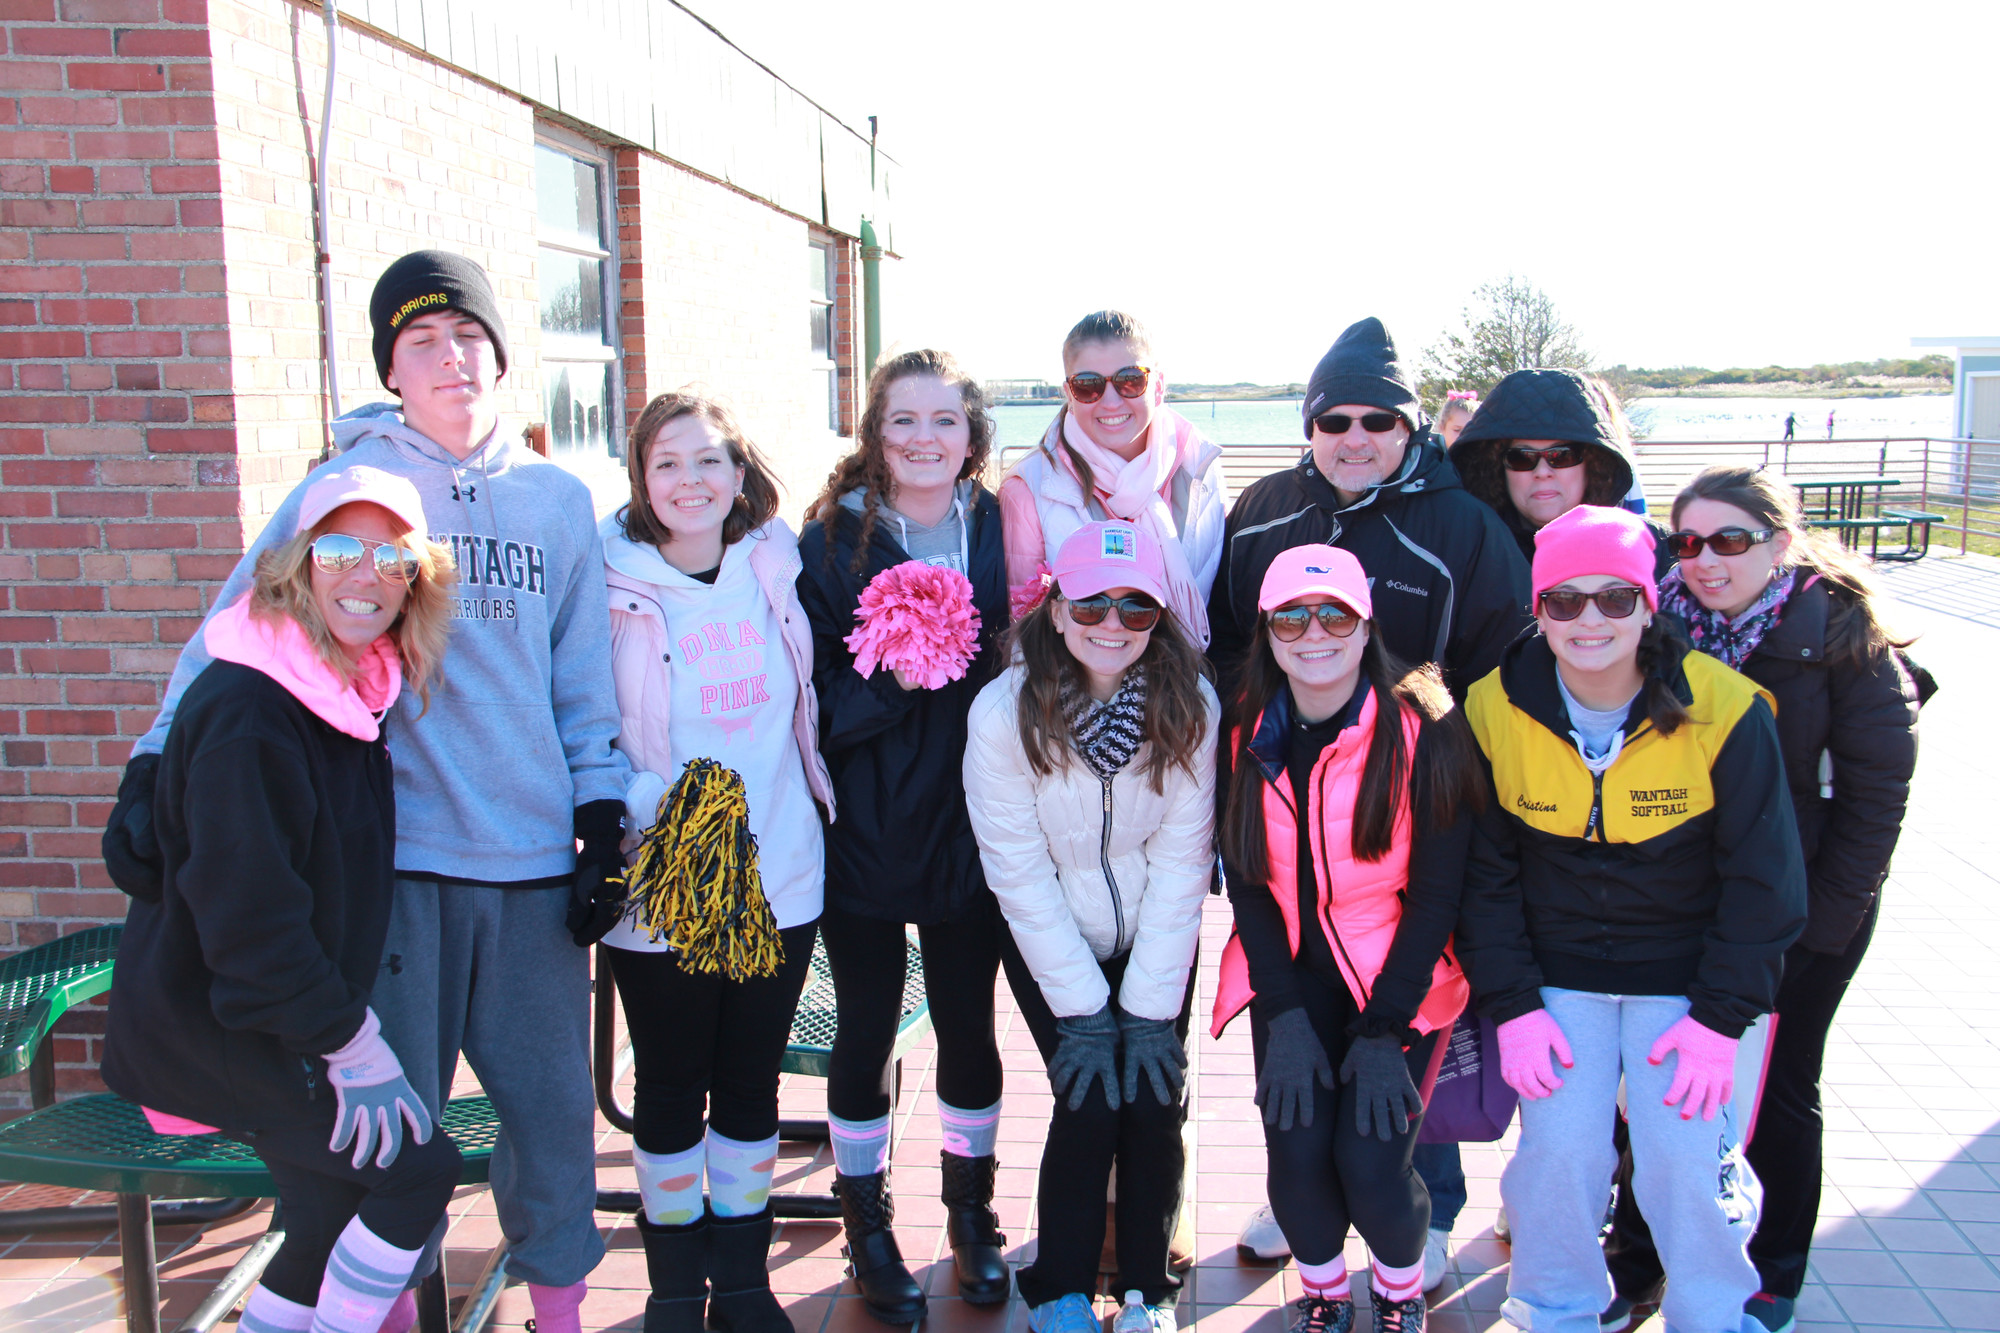 The Wantagh High SChool Key Club was among the many groups that participated in the annual Making Strides of Long Island Walk at Jones Beach last Sunday to raise money and awareness for breast cancer.